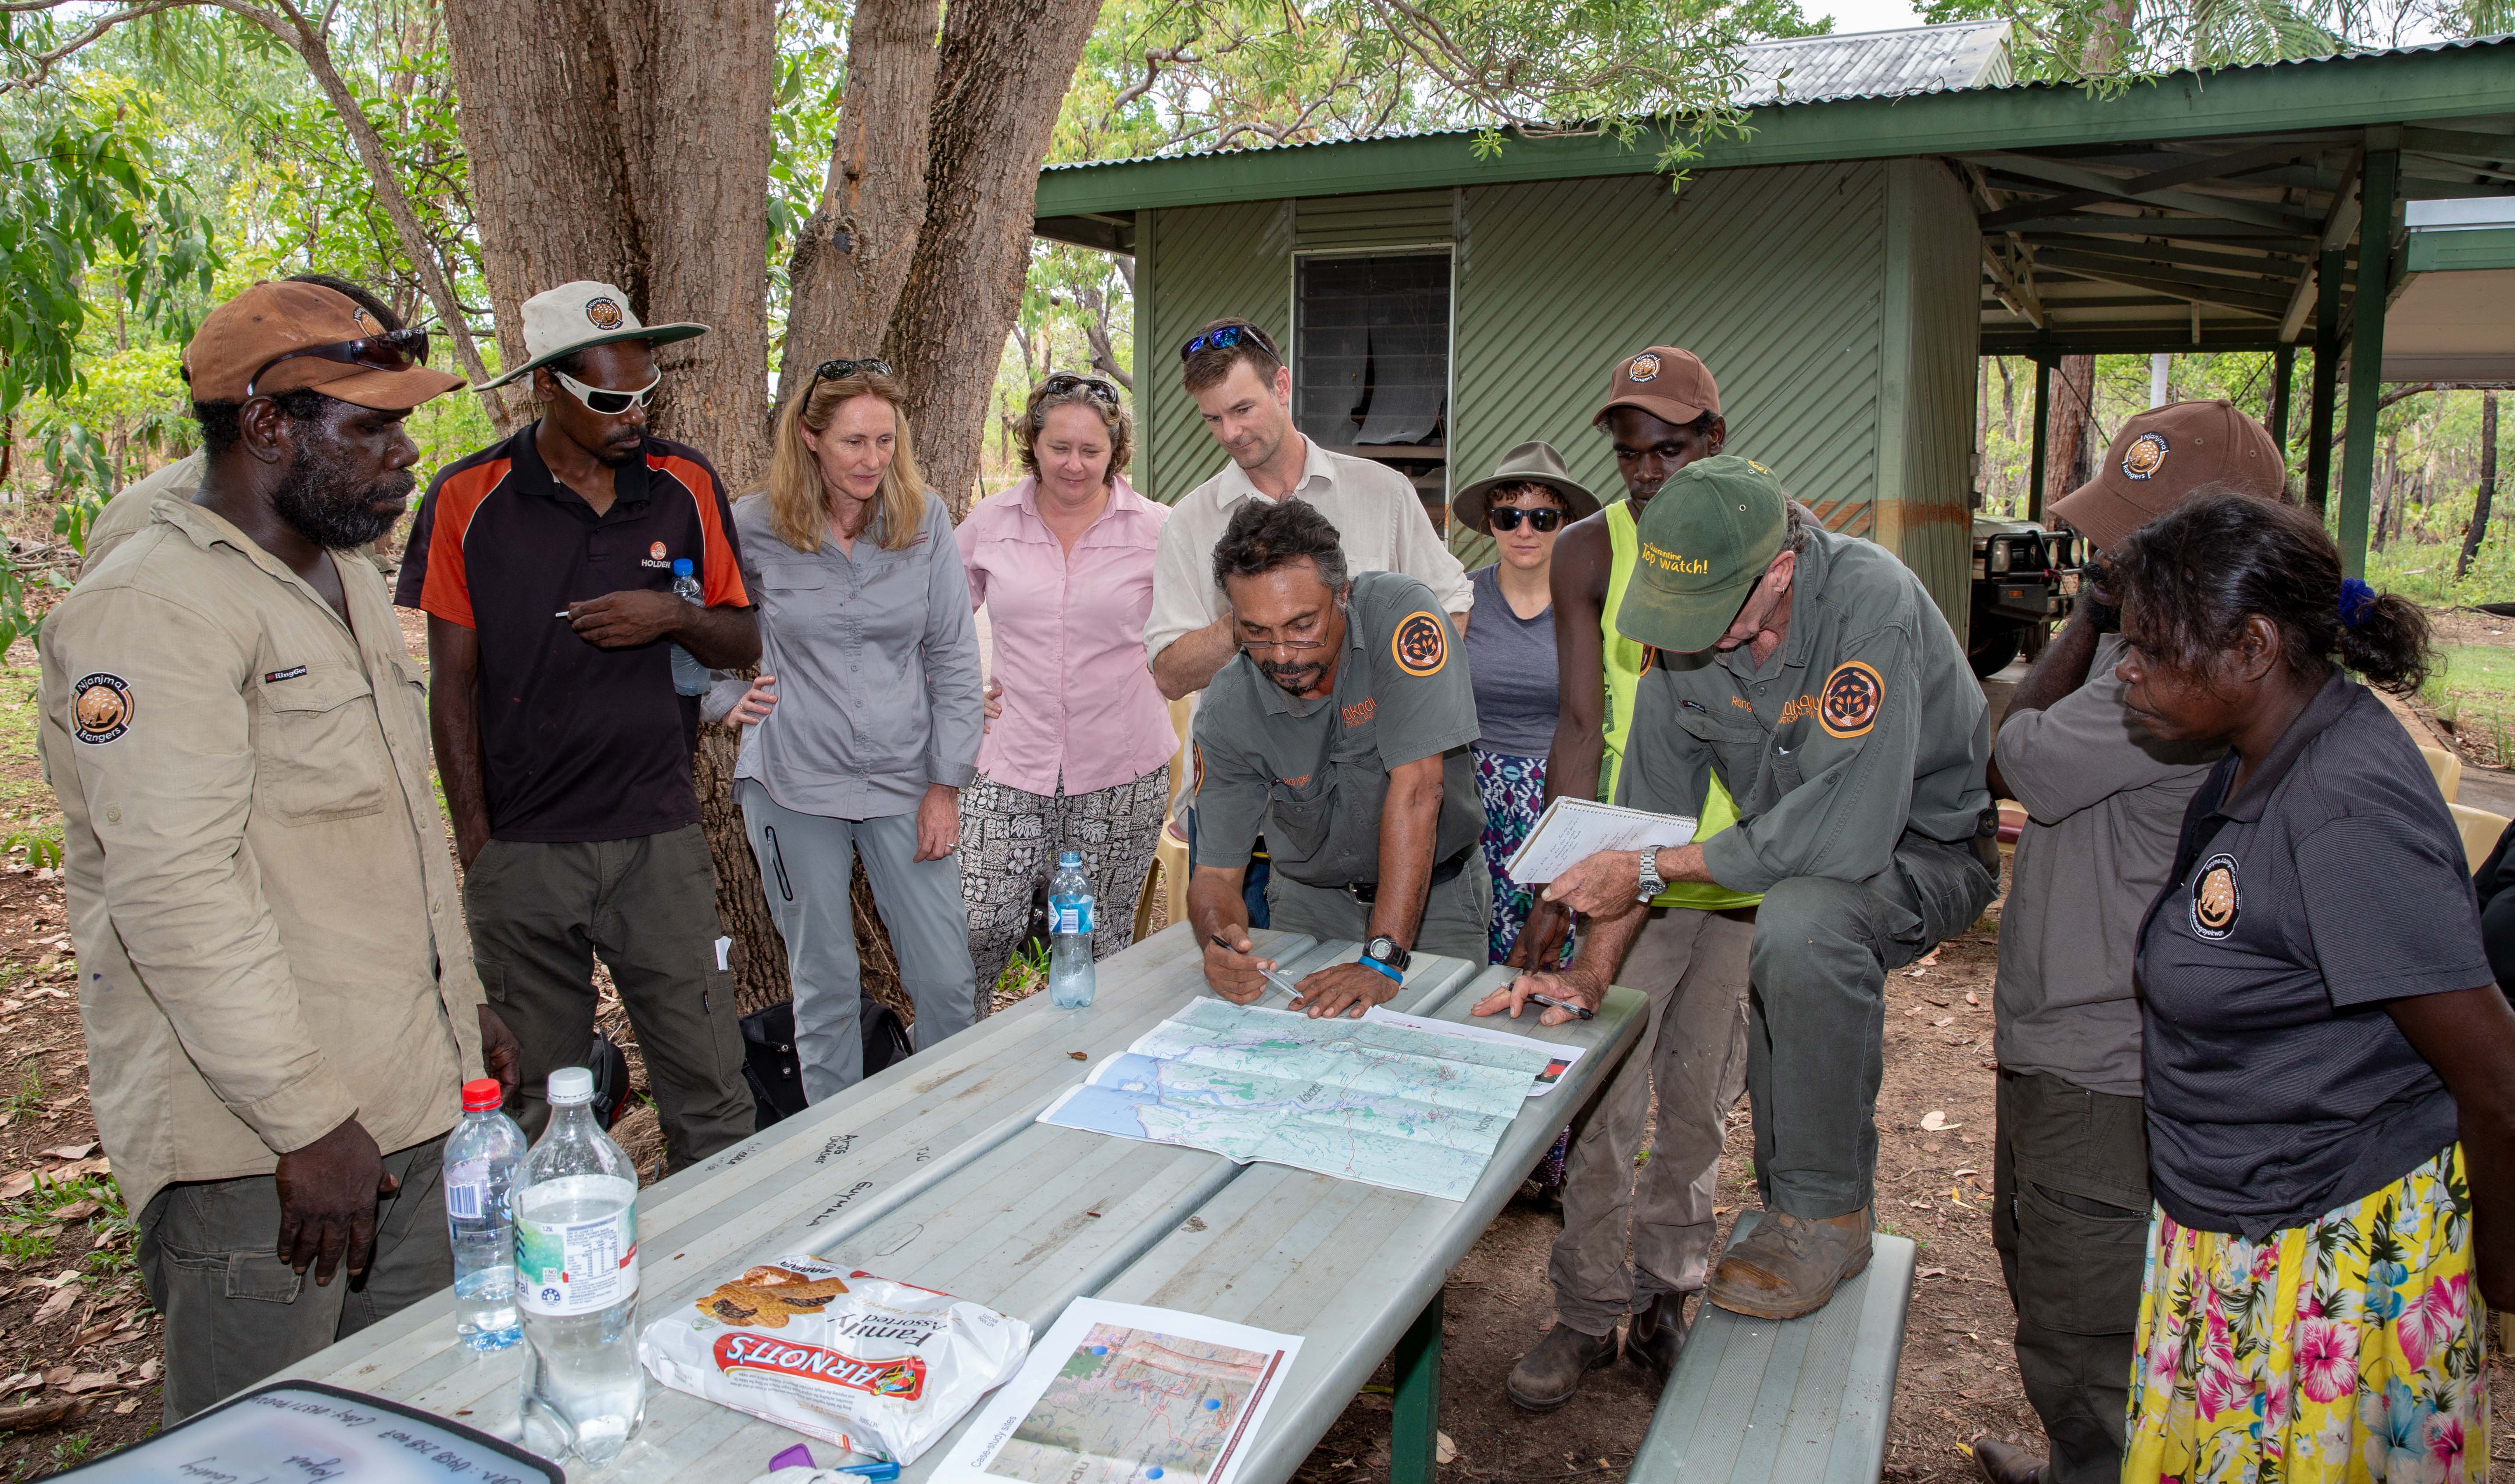 Bininj/Mungguy Research Steering Committee, Kakadu staff and Researchers assess maps at table